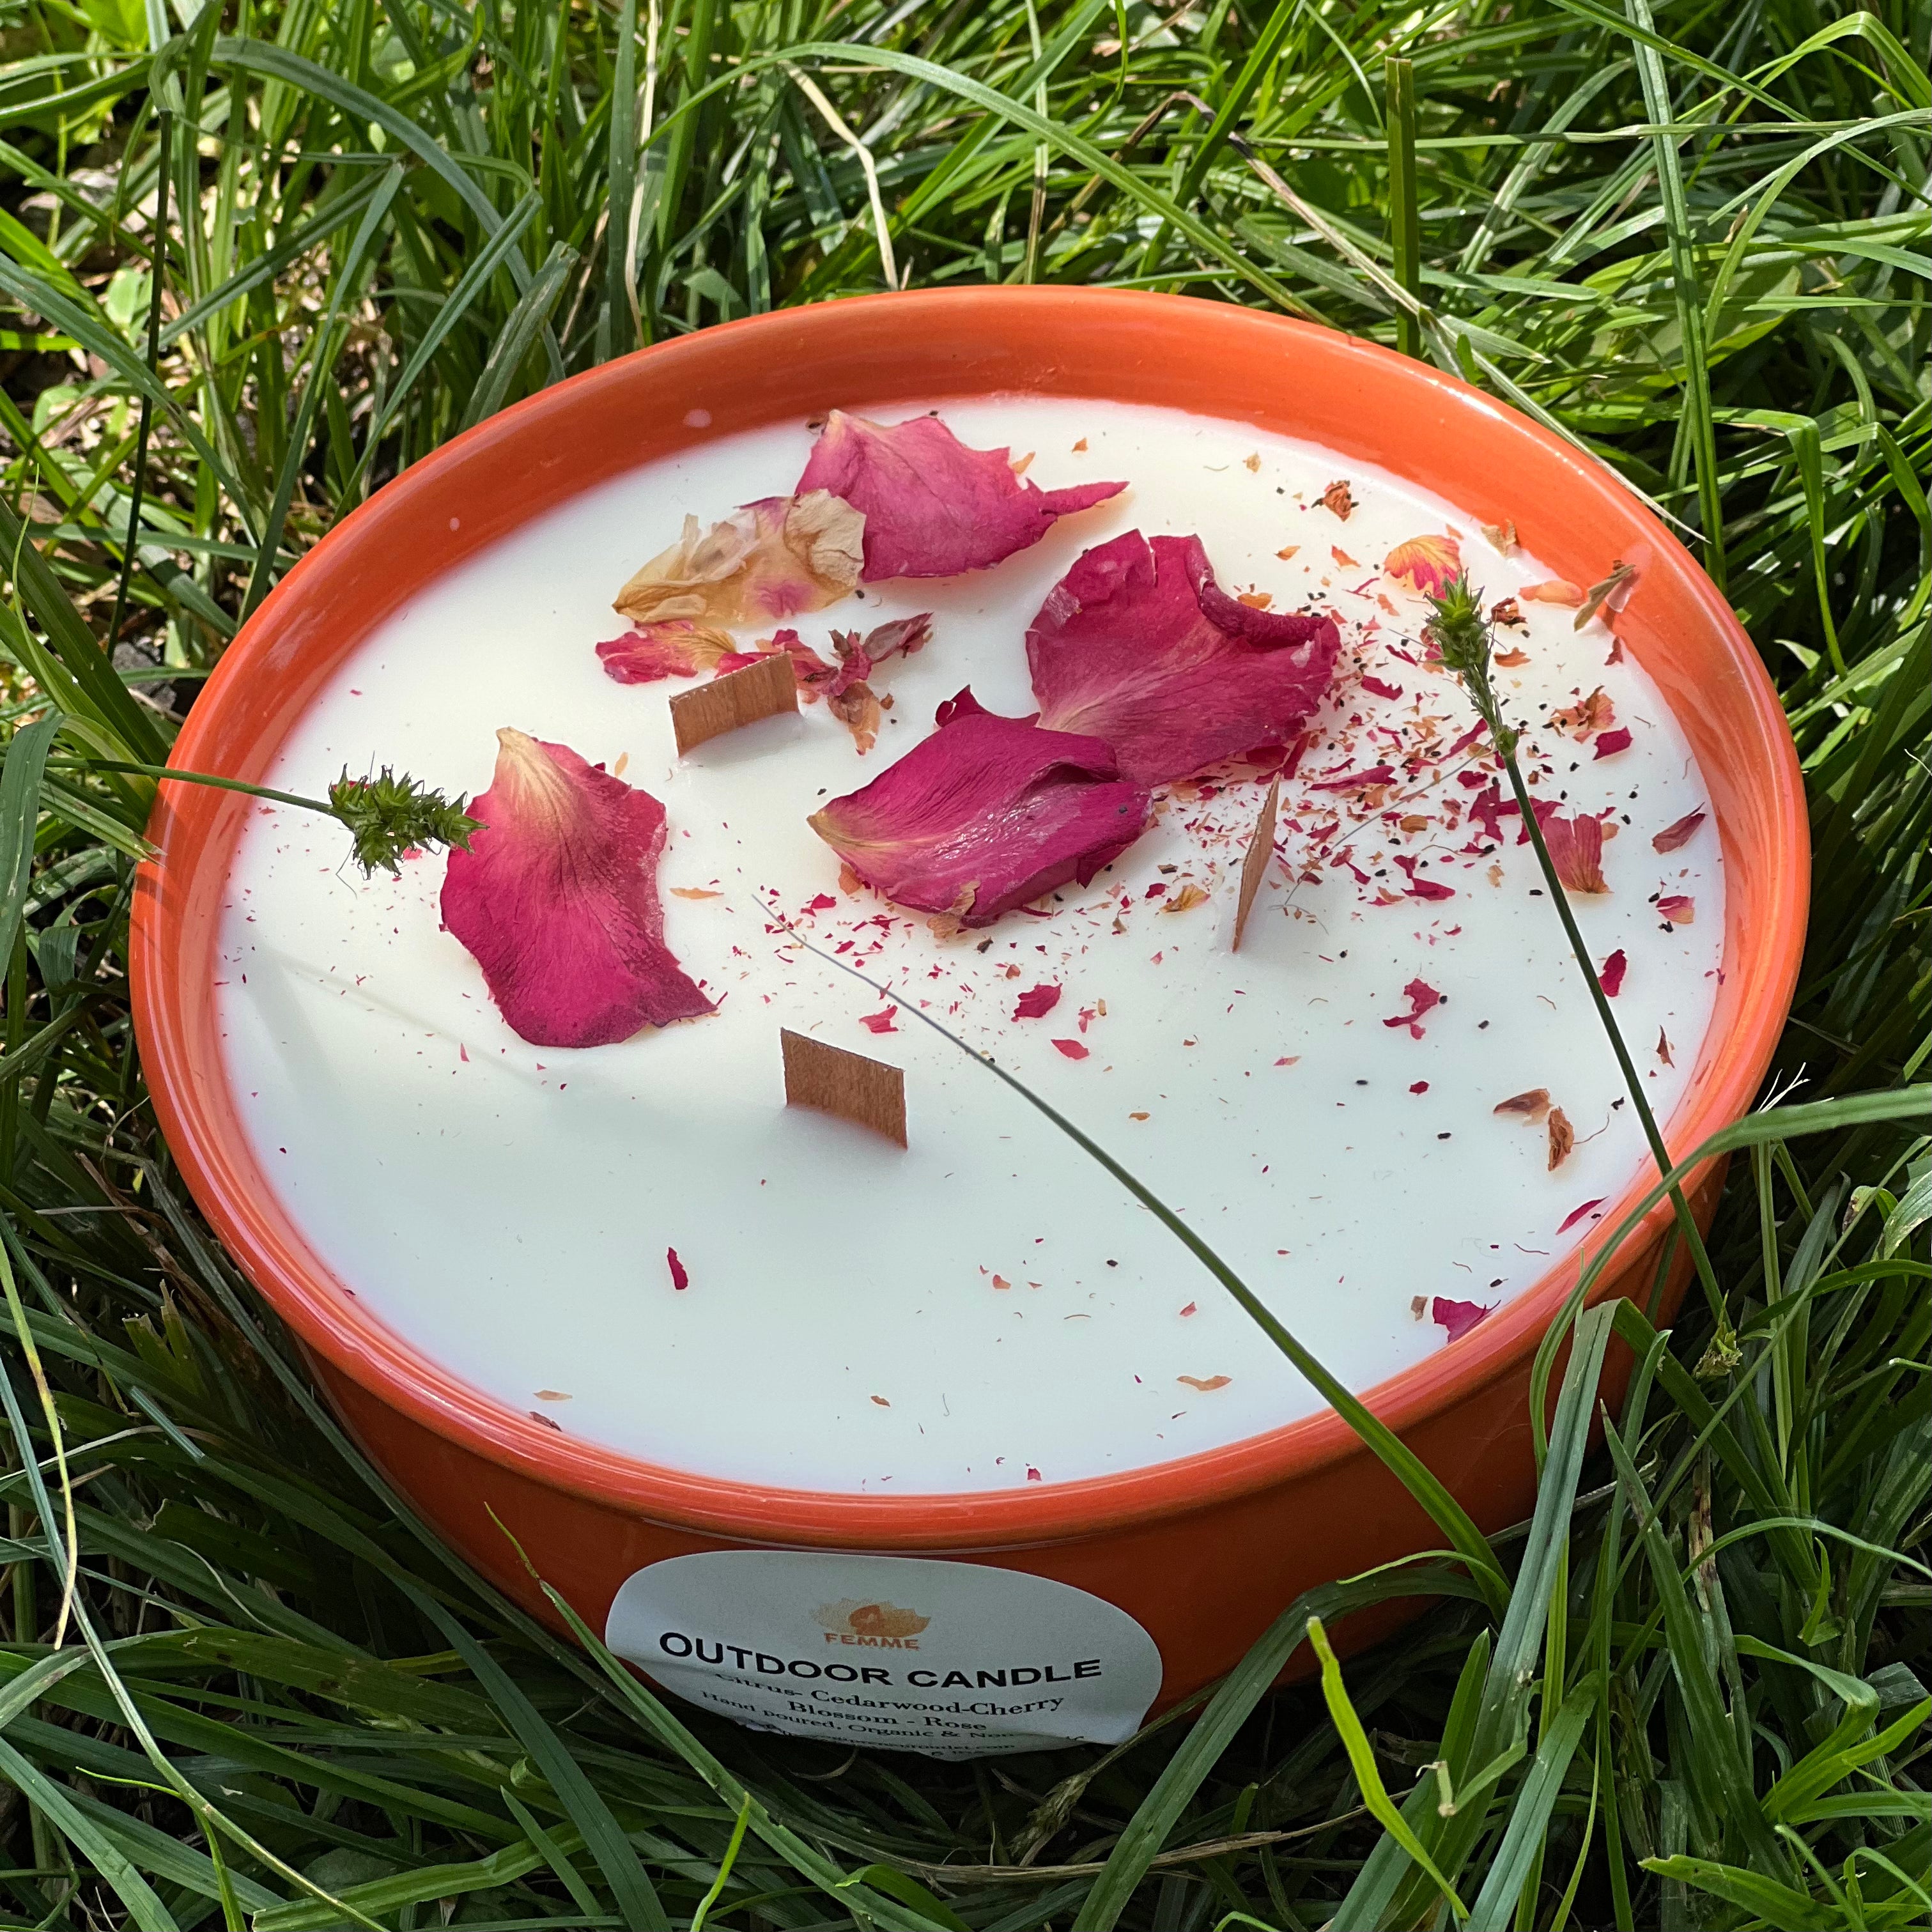 Scented Outdoor Candle with Rose petals